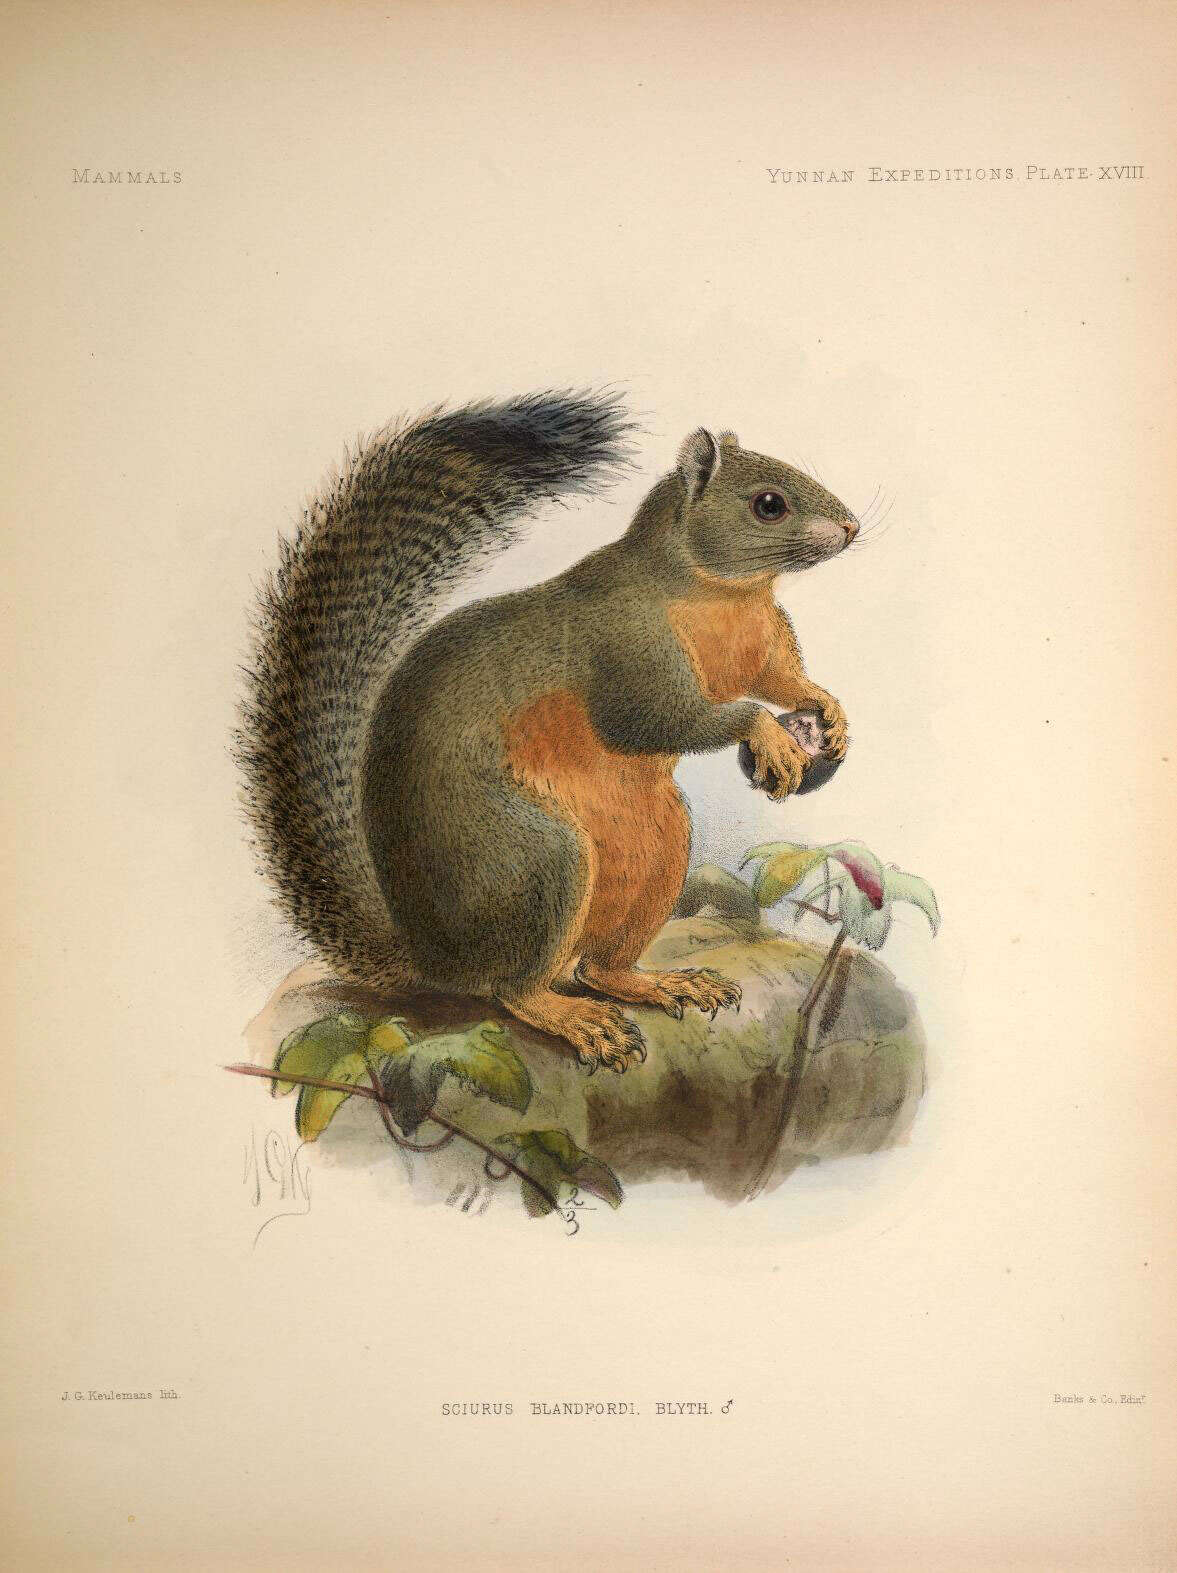 Image of Phayre's Squirrel